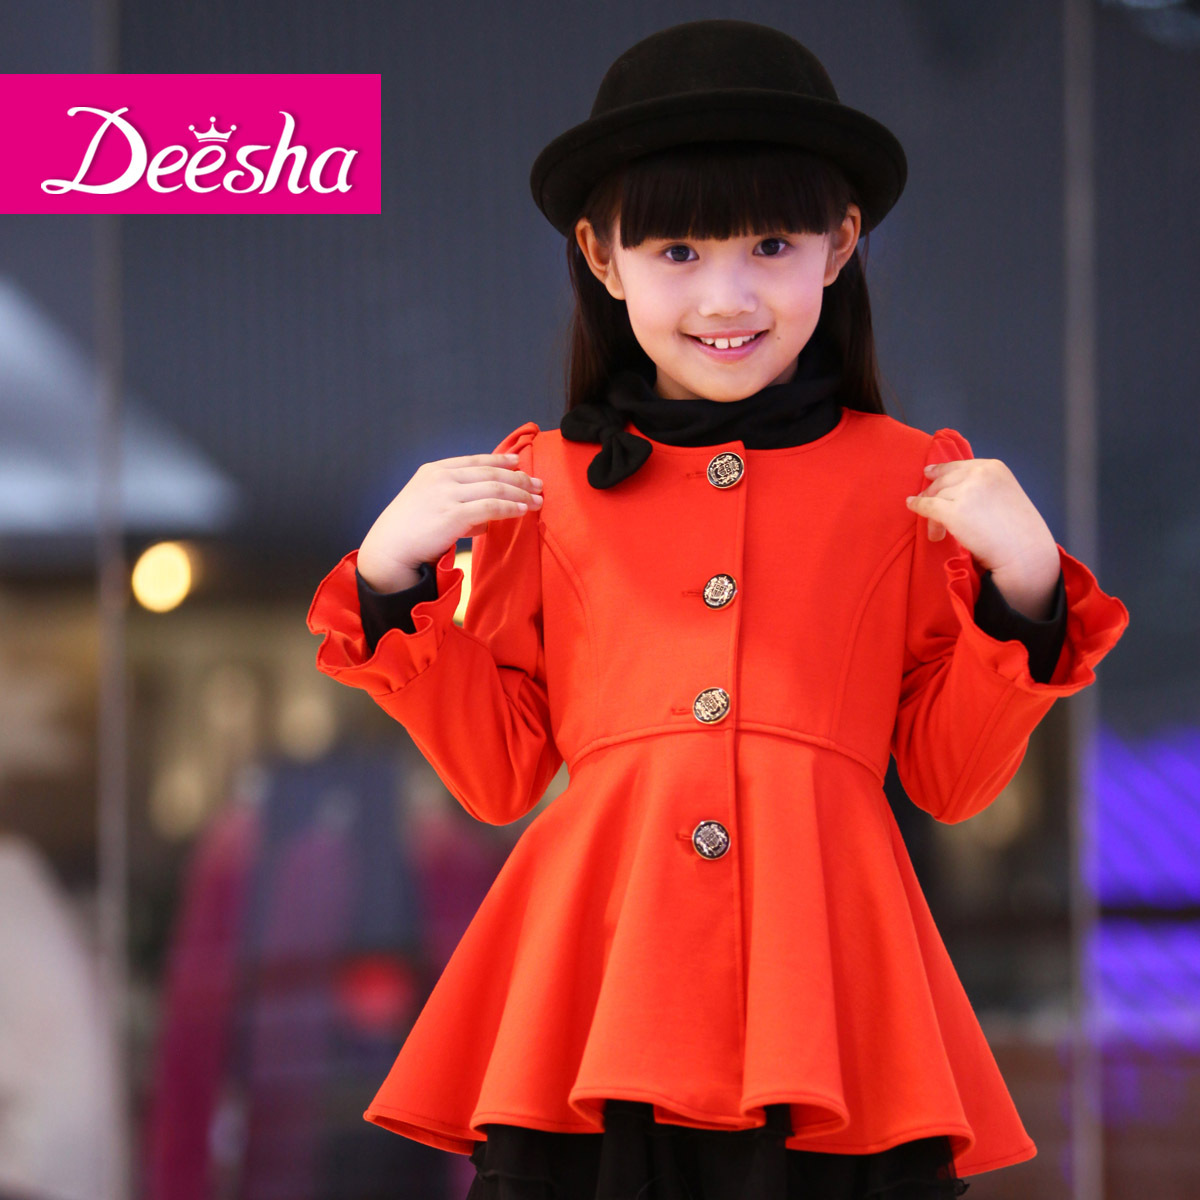 DEESHA 2012 autumn female child outerwear princess o-neck solid color child long-sleeve outerwear